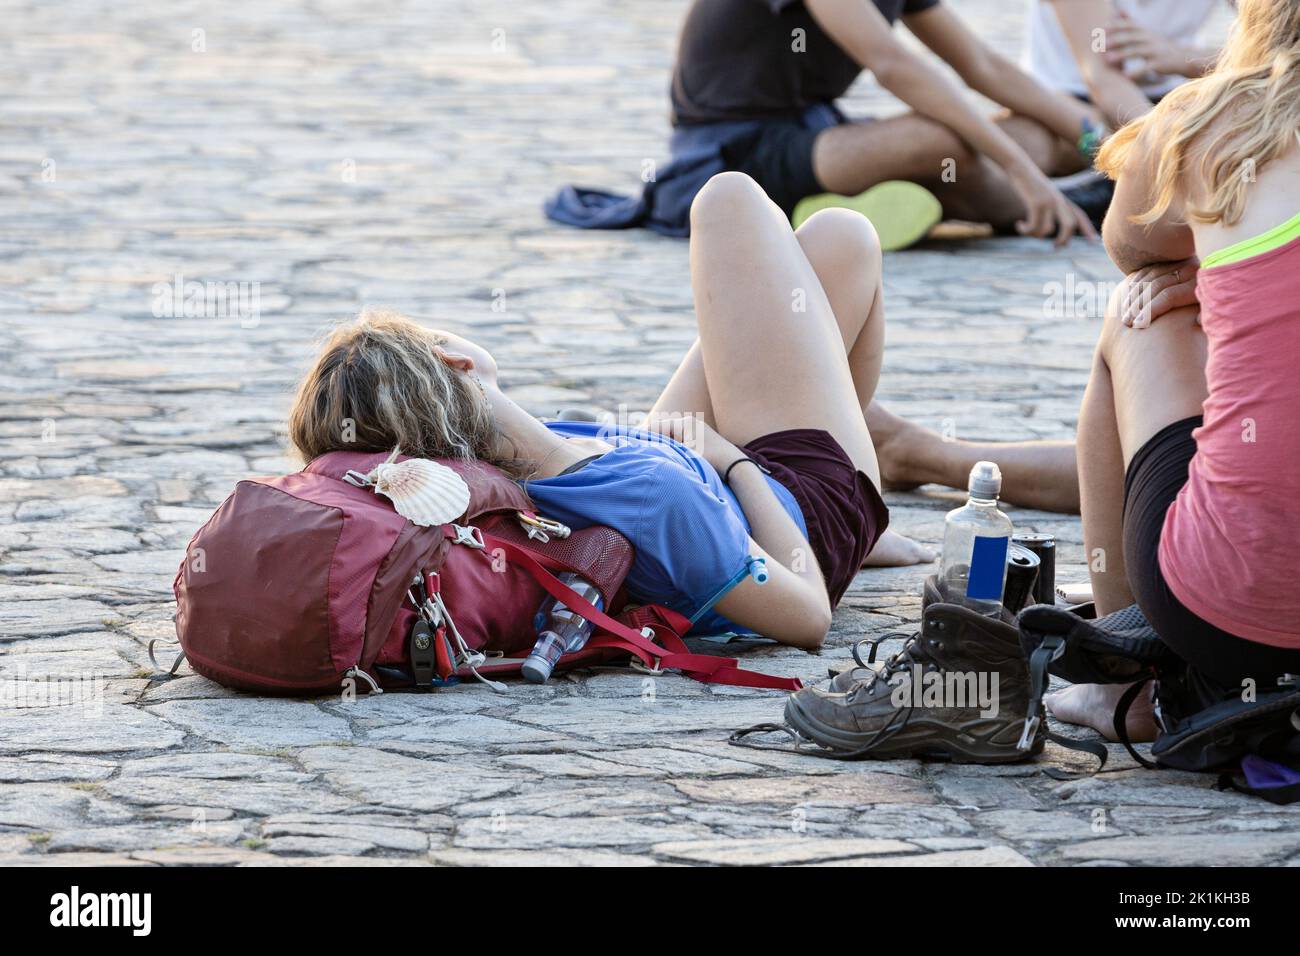 Pilgrim resting with her backpack in the Obradoiro square after arriving to Santiago de Compostela after walking the Camino de Santiago. Copy space Stock Photo